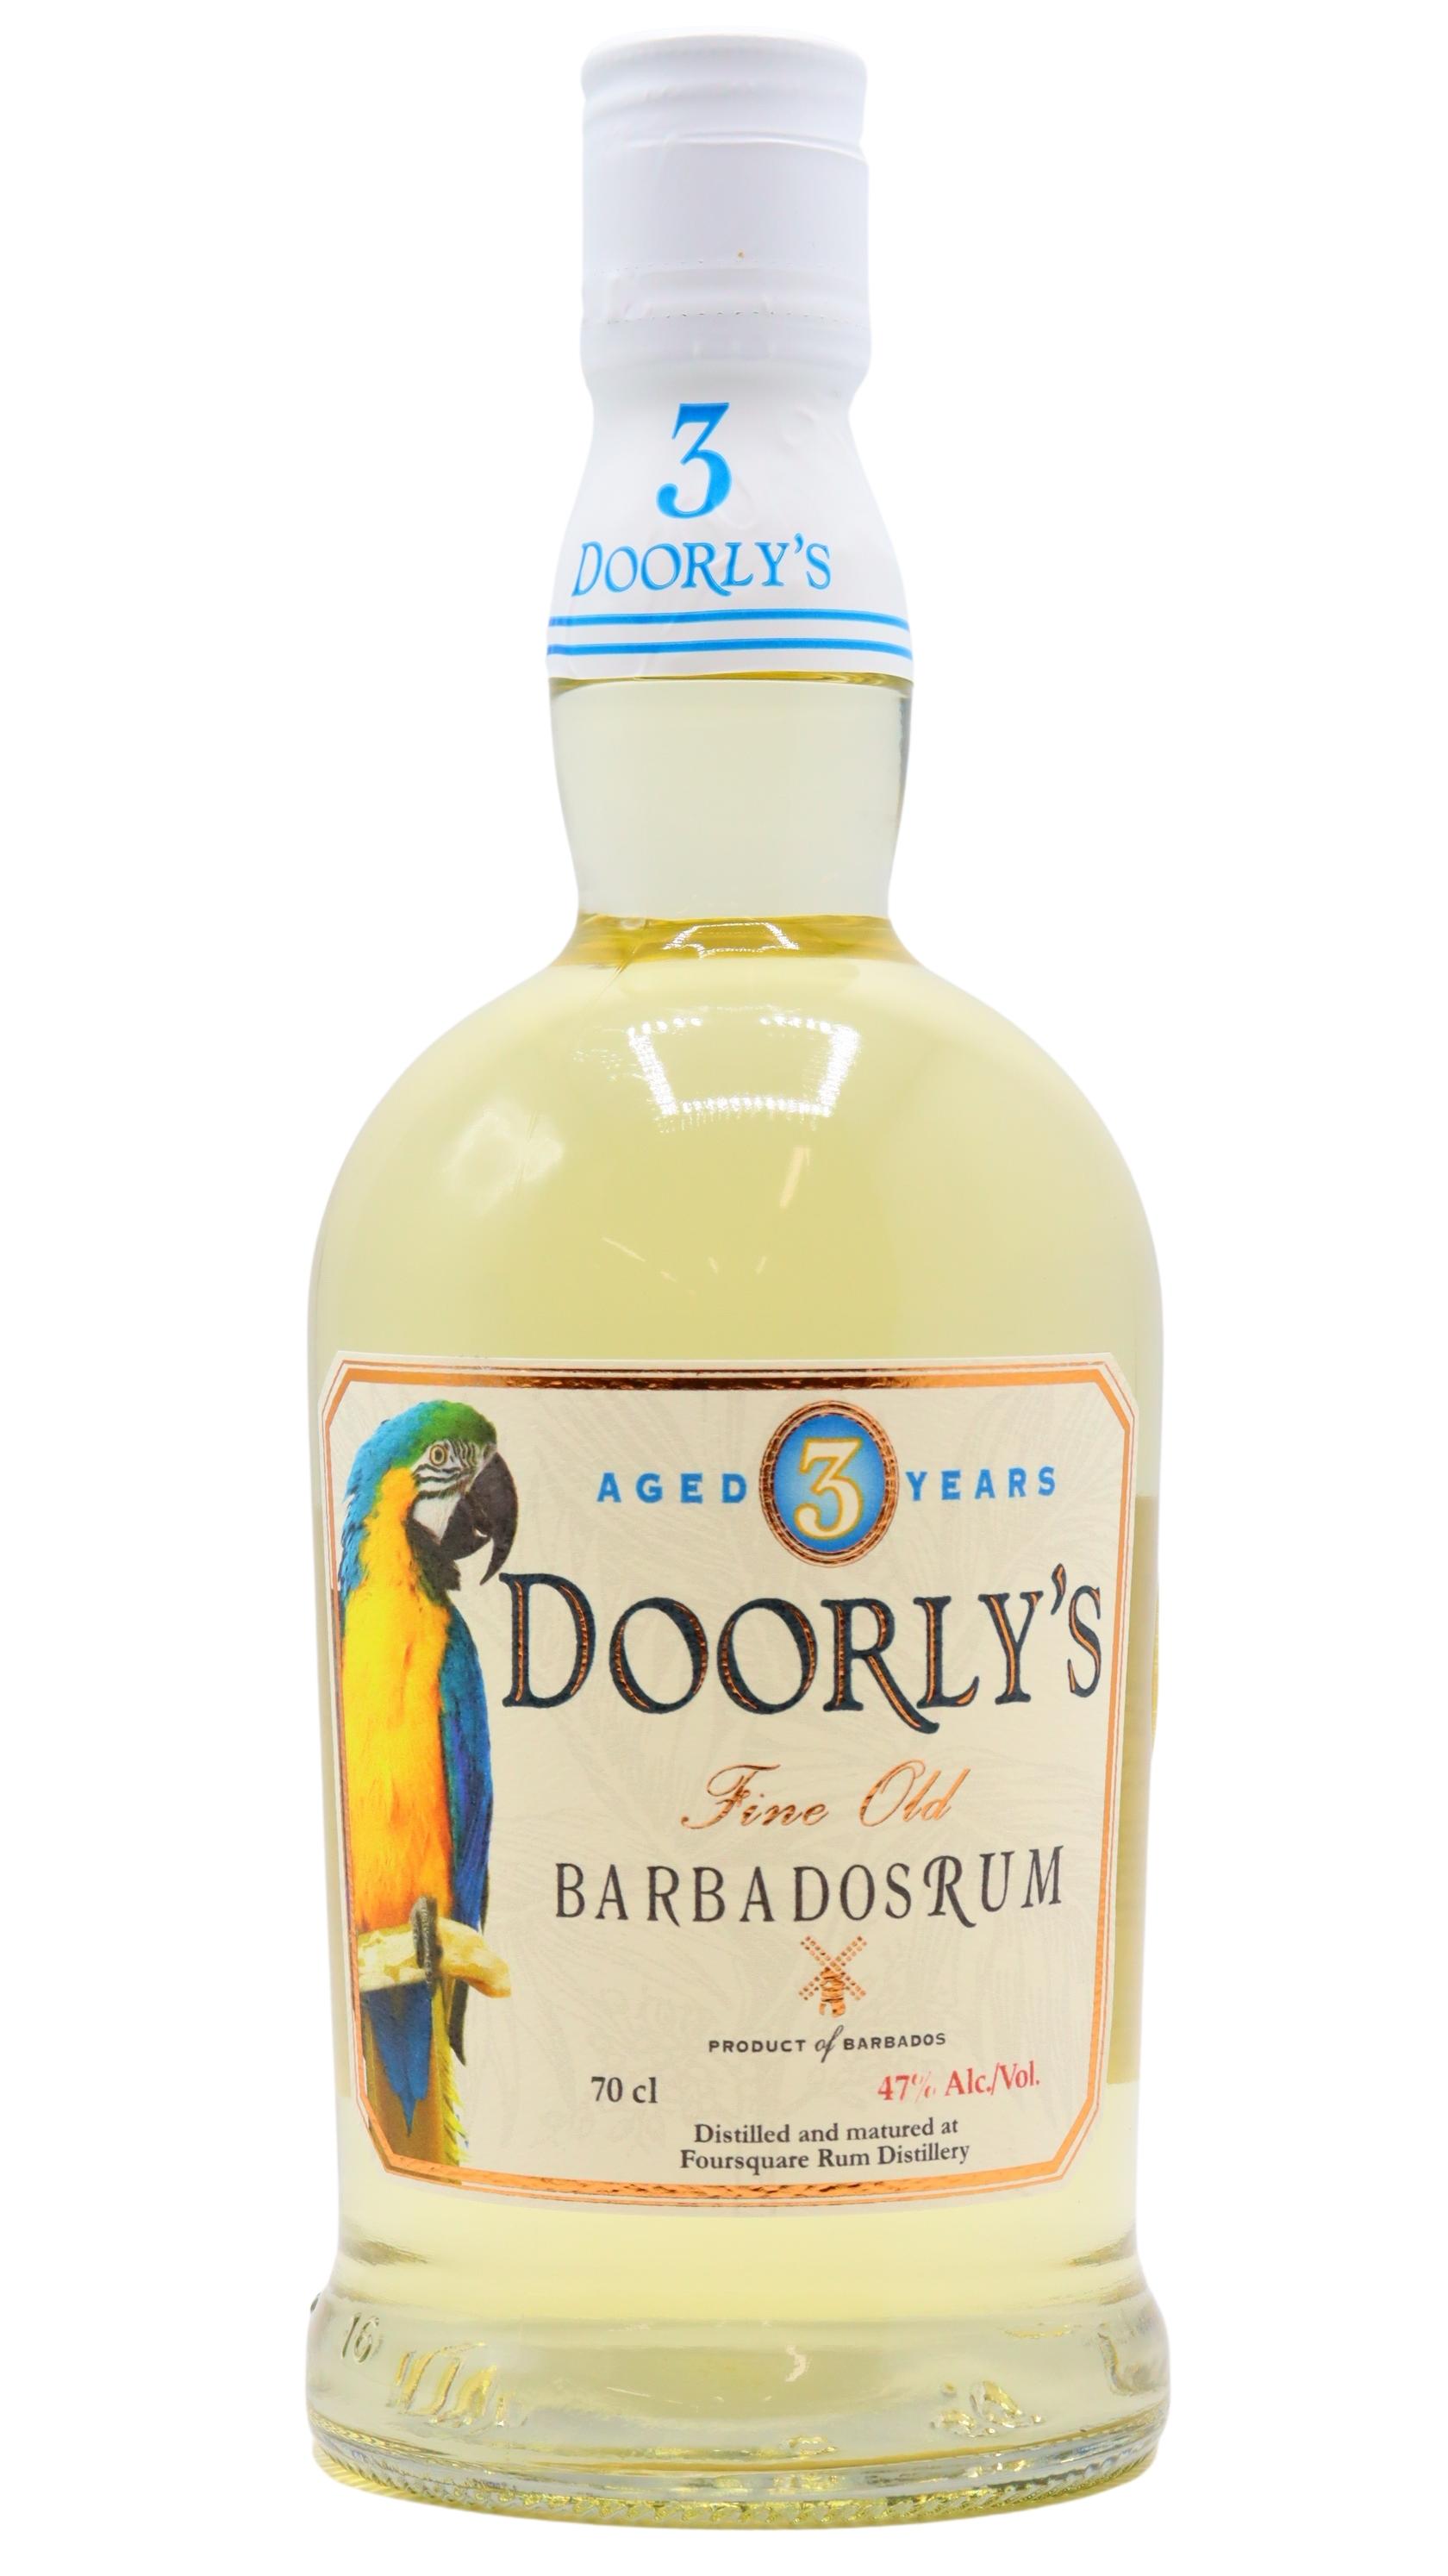 Foursquare - Doorlys Fine Old Bourbon White year old Liquor Rum Over-Proof | Store 3 Barbados